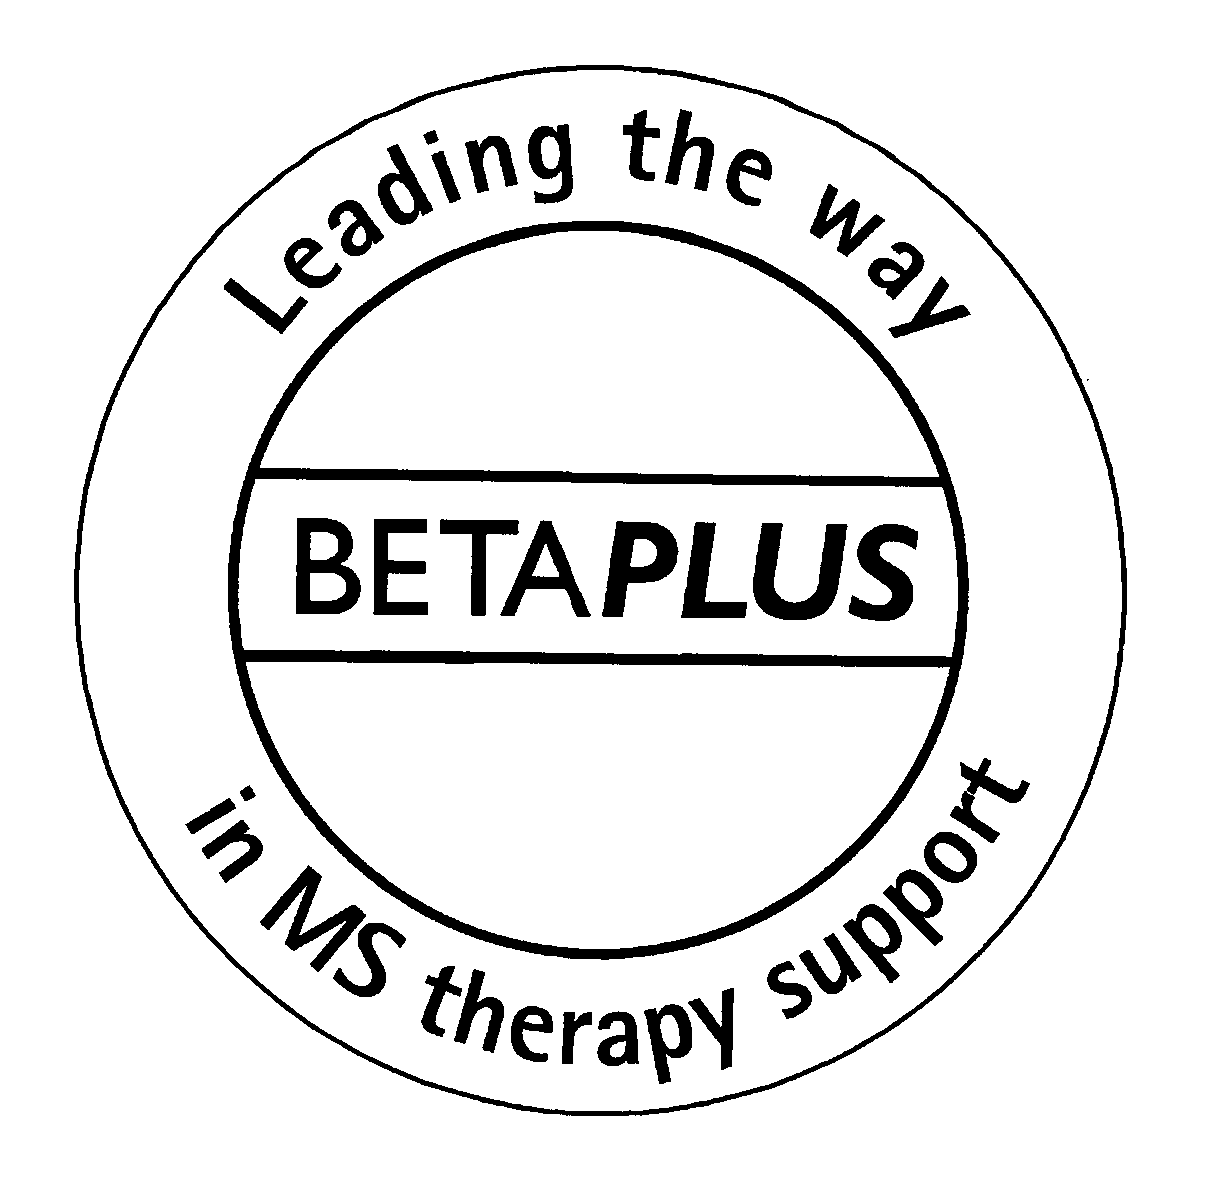  BETAPLUS LEADING THE WAY IN MS THERAPY SUPPORT